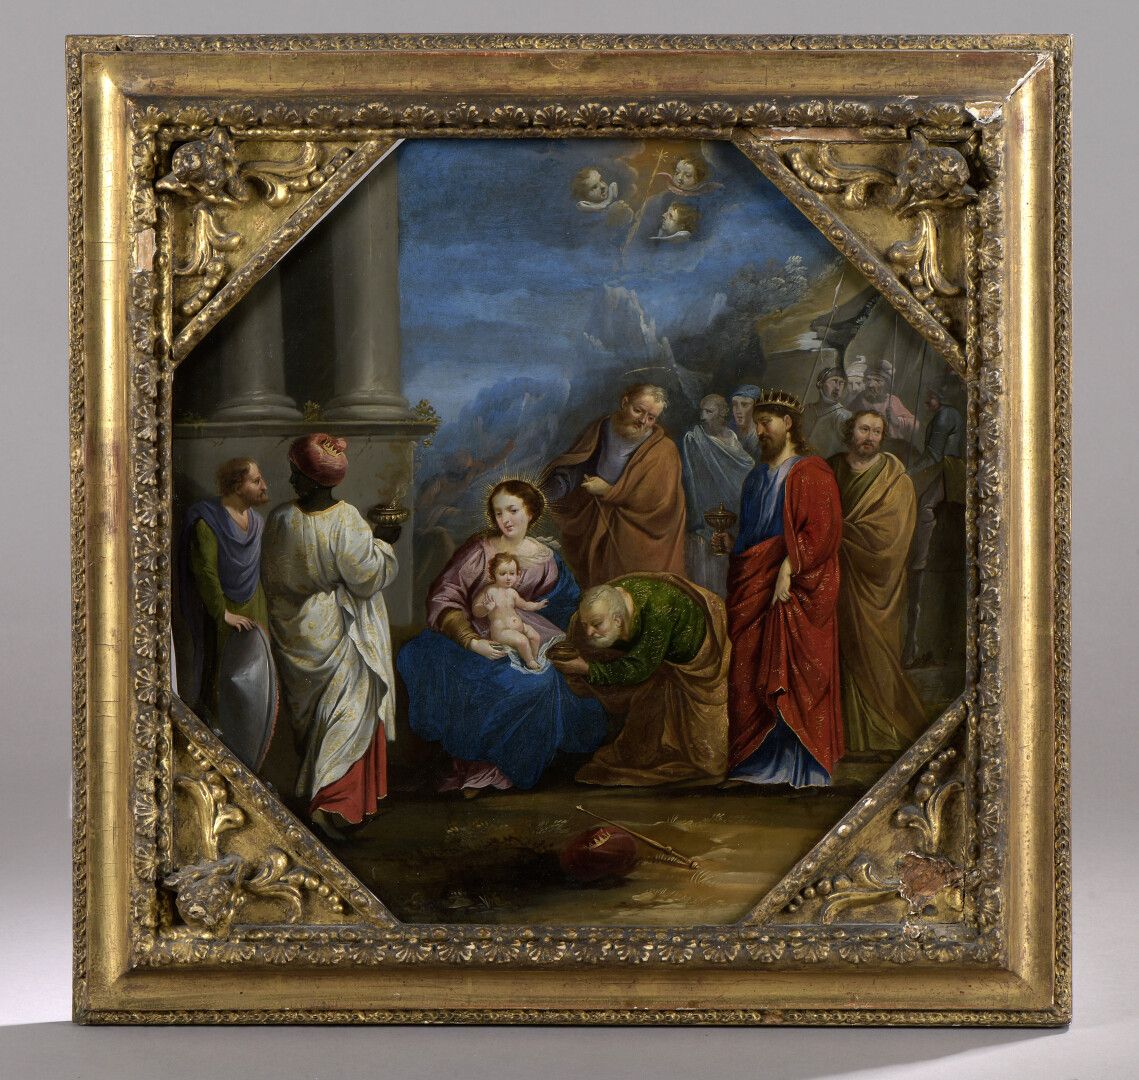 Null FRENCH SCHOOL of the first half of the 17th century

The Adoration of the M&hellip;